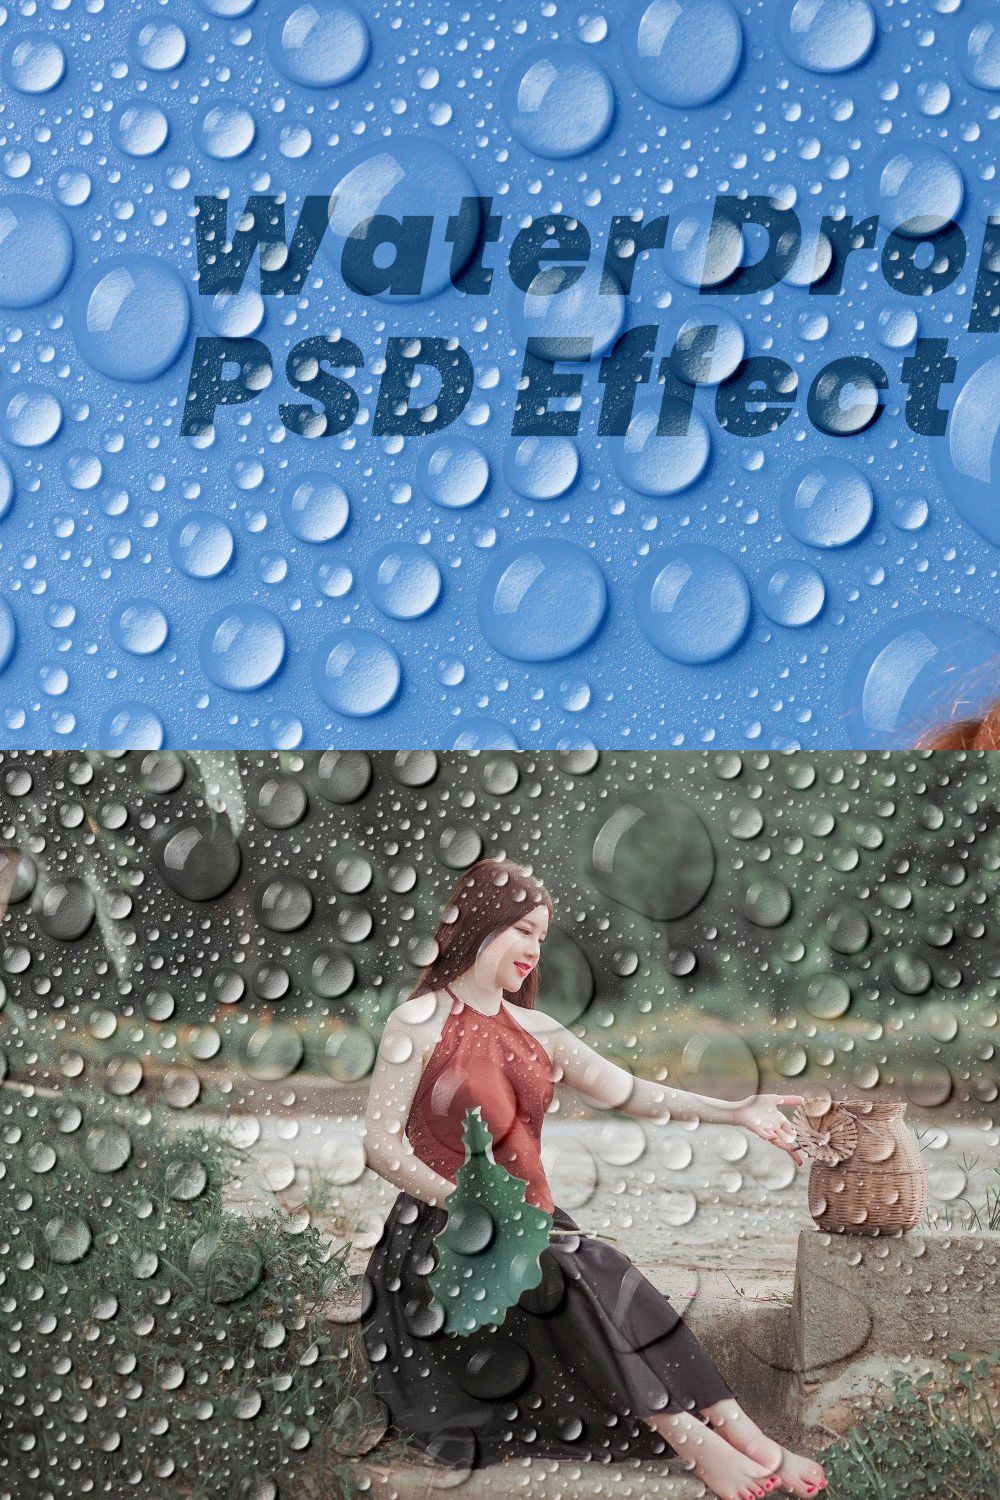 Waterdrop Photo Effect Psd pinterest preview image.